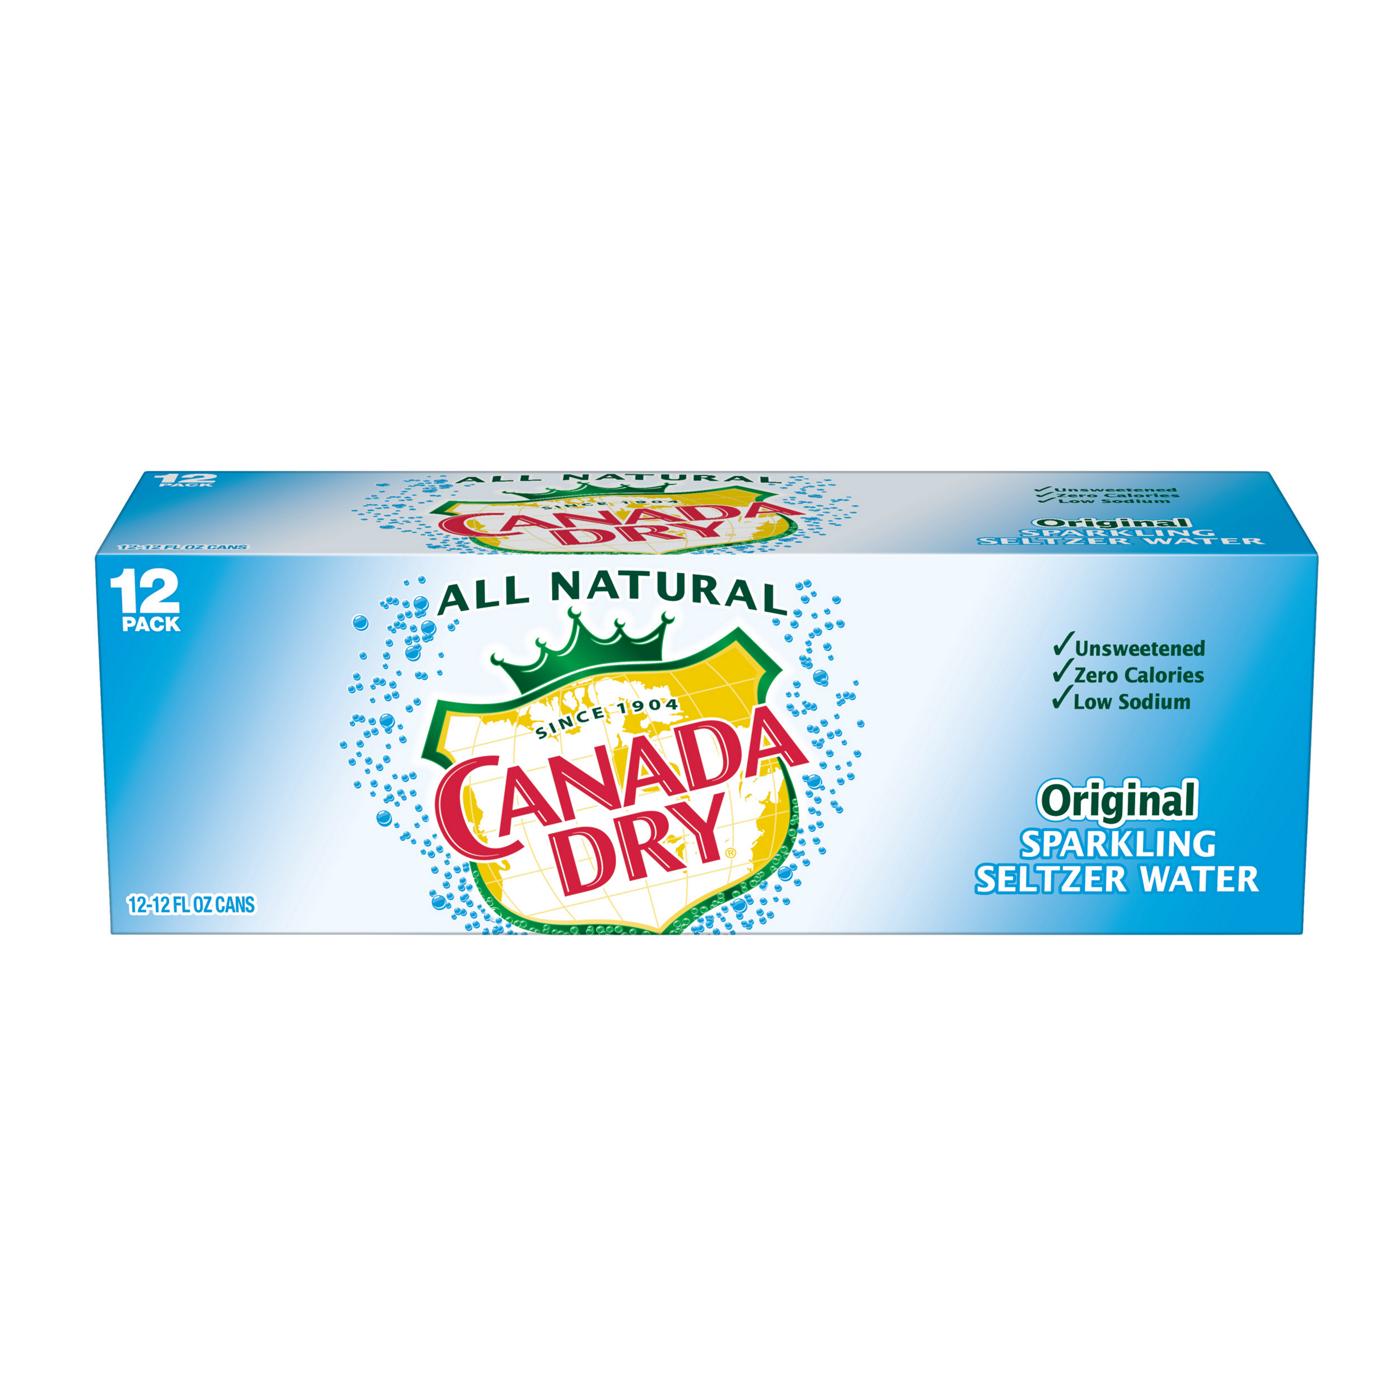 Canada Dry Original Sparkling Seltzer Water 12 PK Cans; image 3 of 3